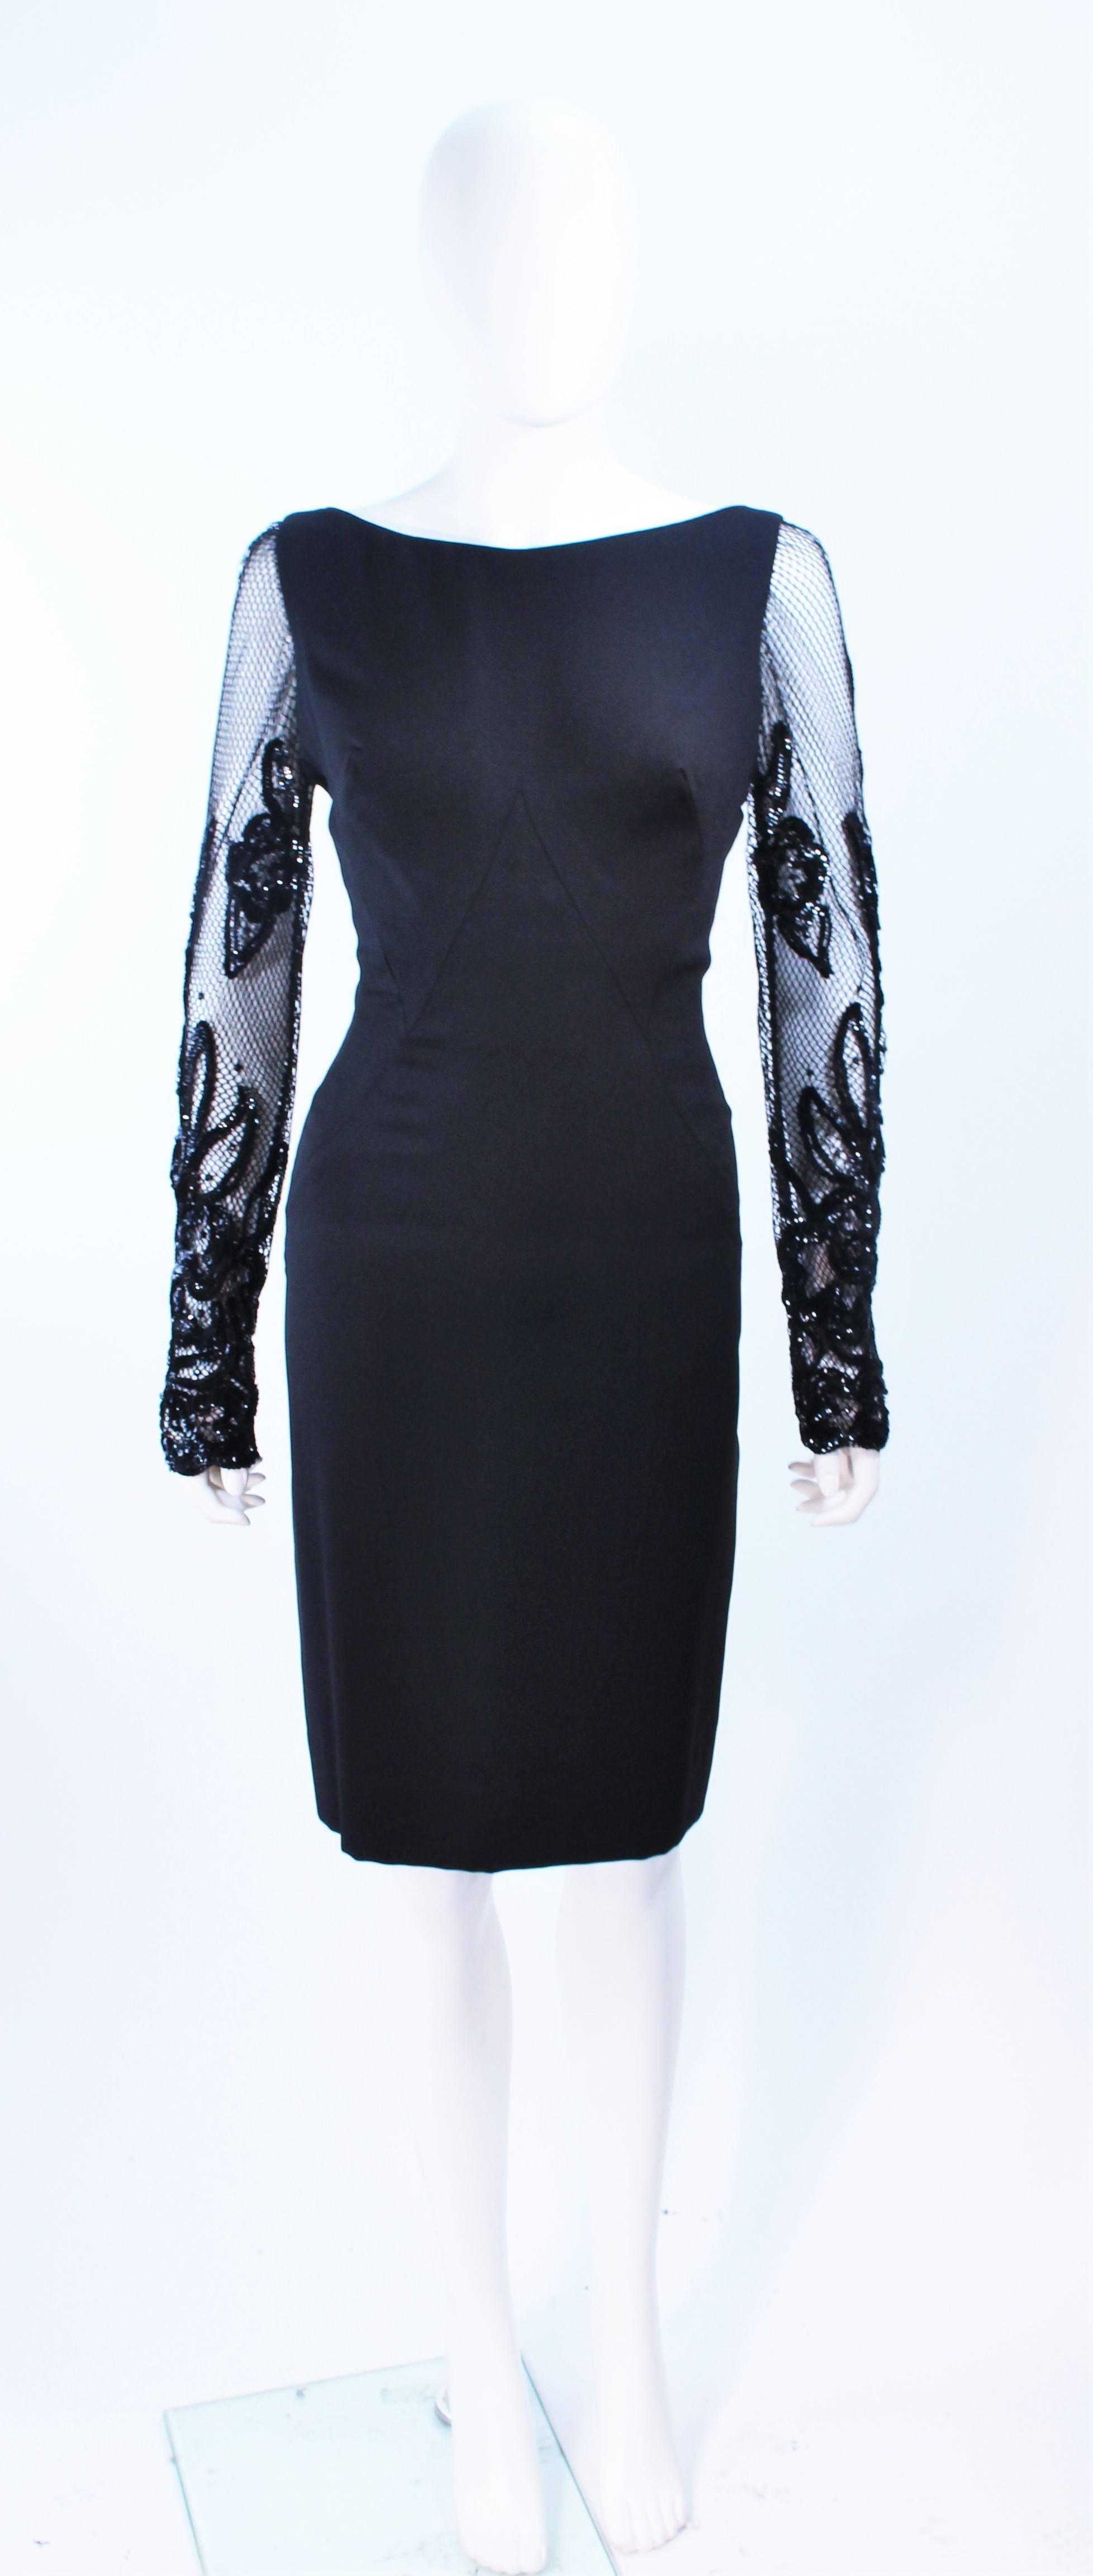 This cocktail dress is composed of a black silk and features mesh sleeves with sequin applique in a floral pattern. There is a center back zipper closure with hook and eye. In excellent vintage condition.

**Please cross-reference measurements for